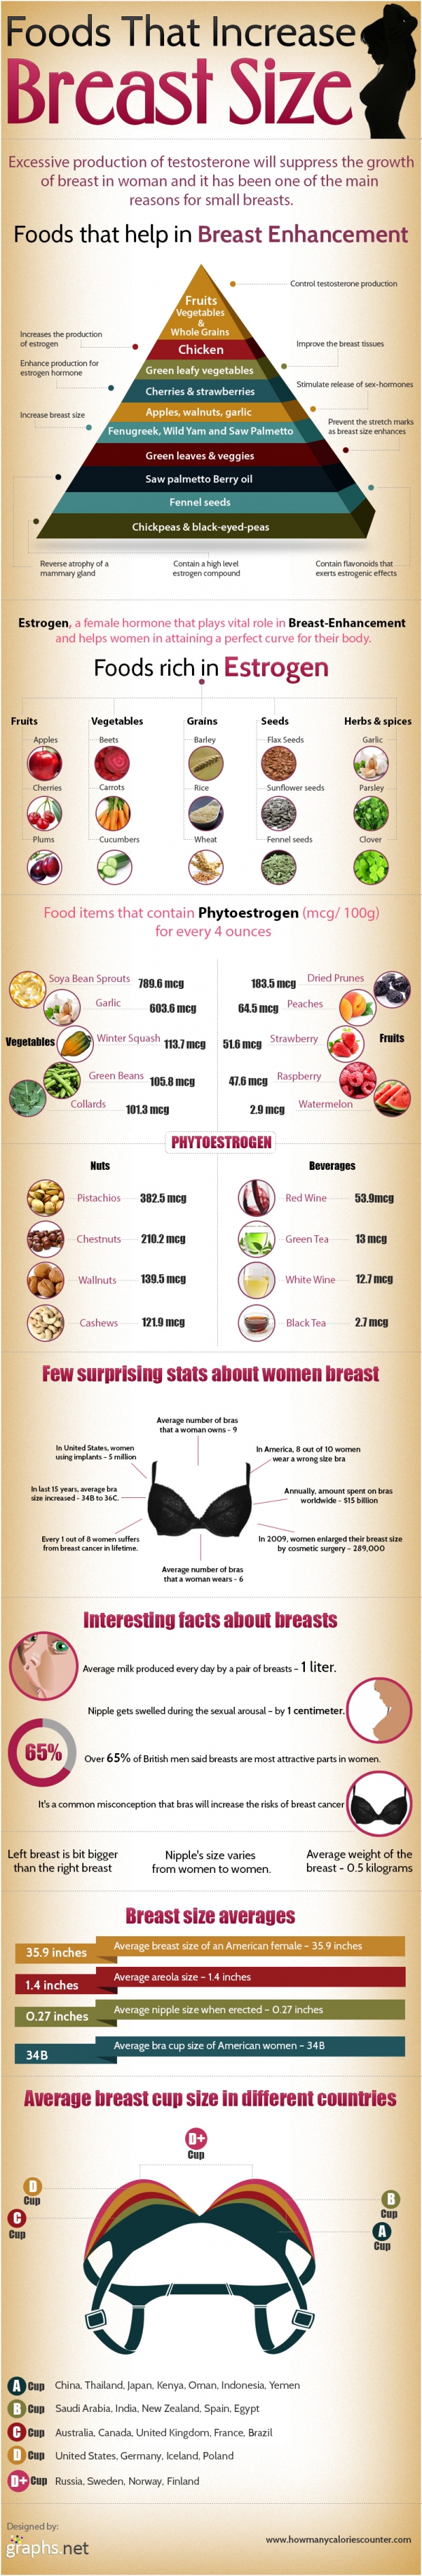 Increase Breast Size 81